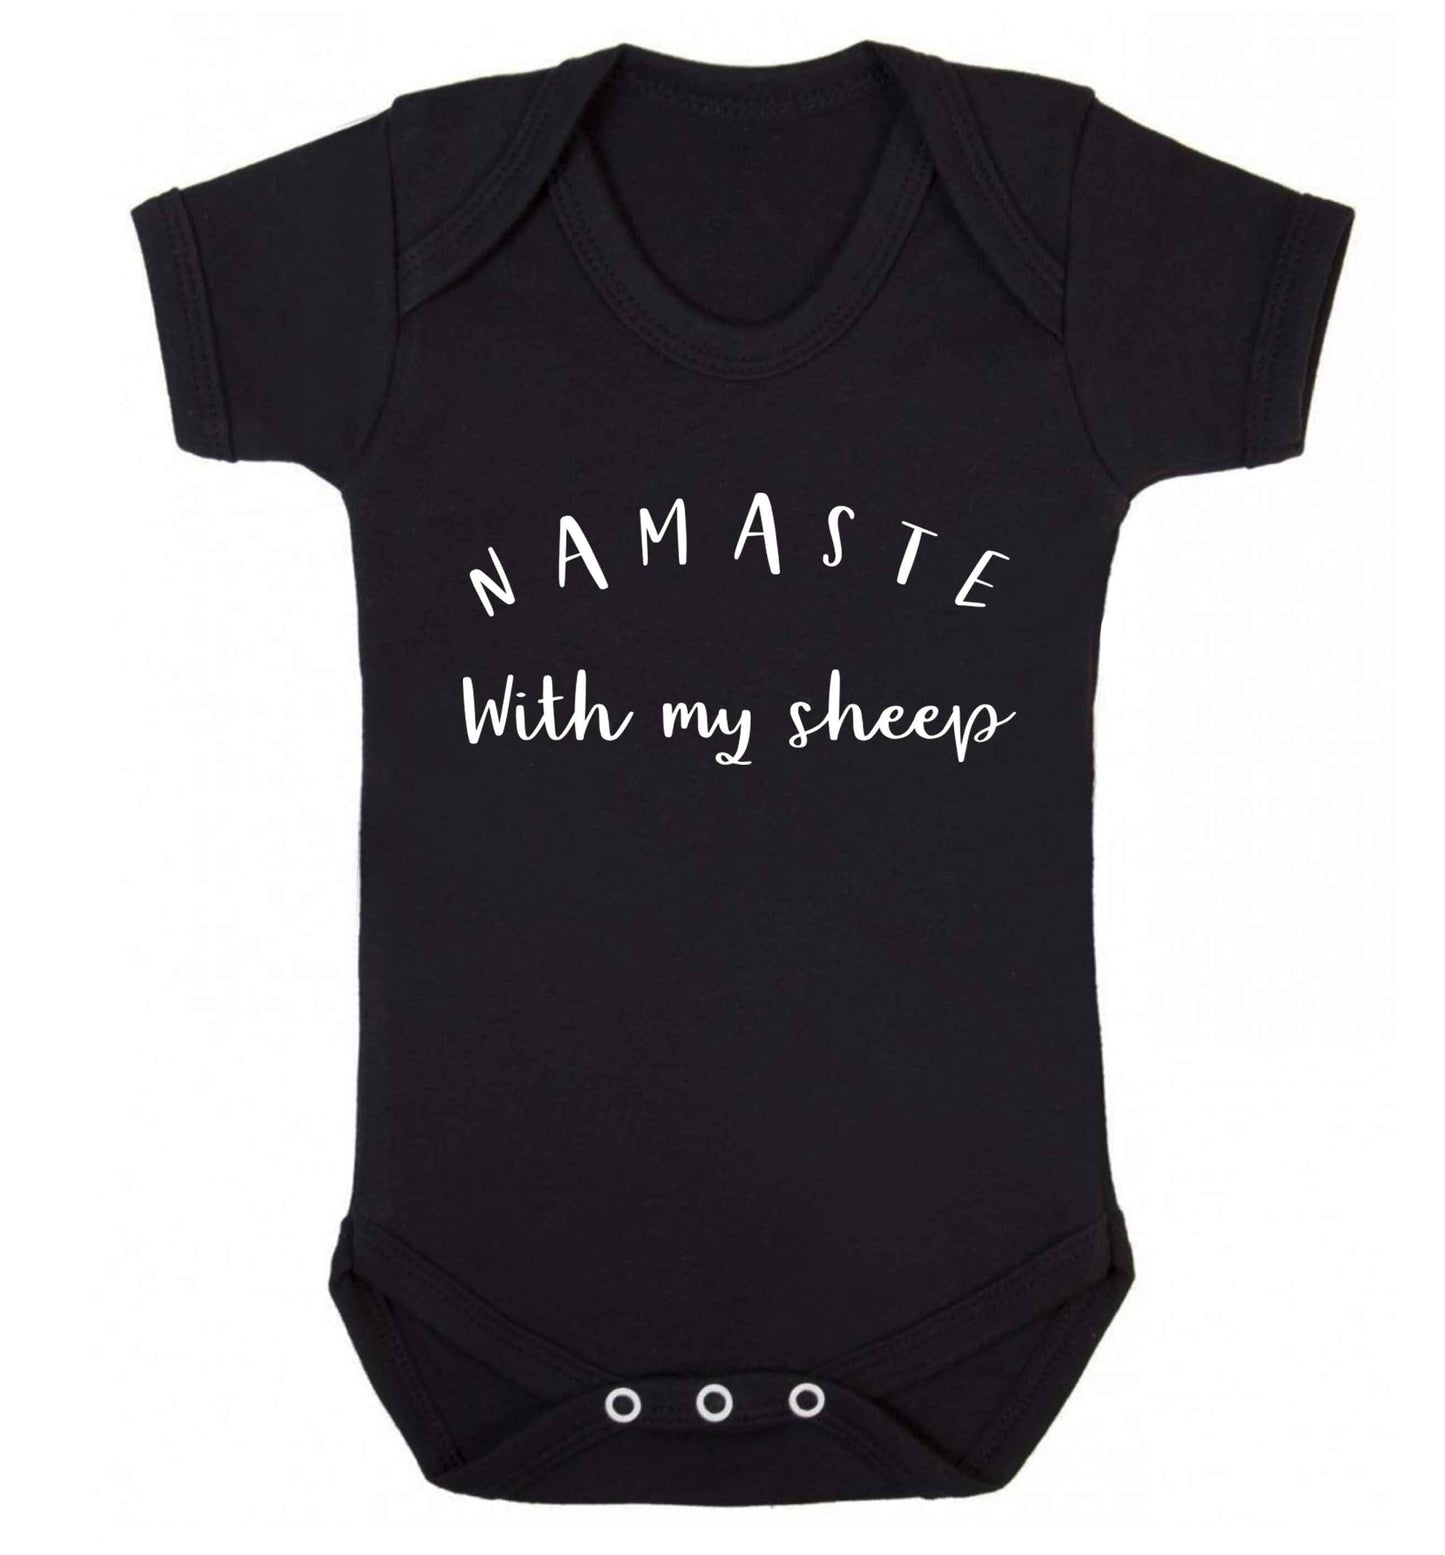 Namaste with my sheep Baby Vest black 18-24 months